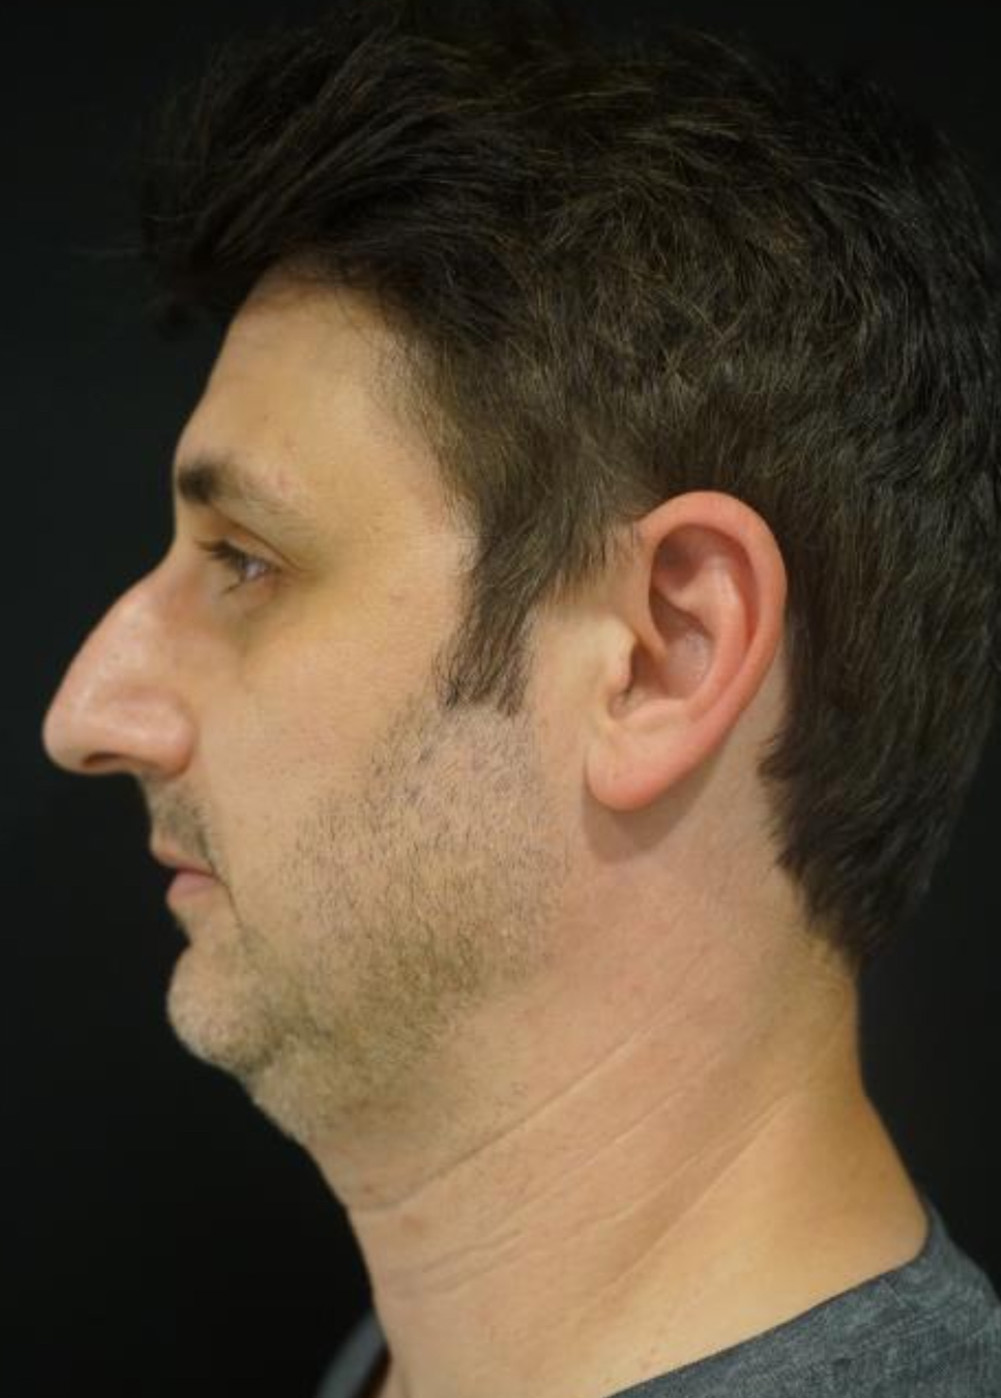 Rhinoplasty Before and After | Kotis